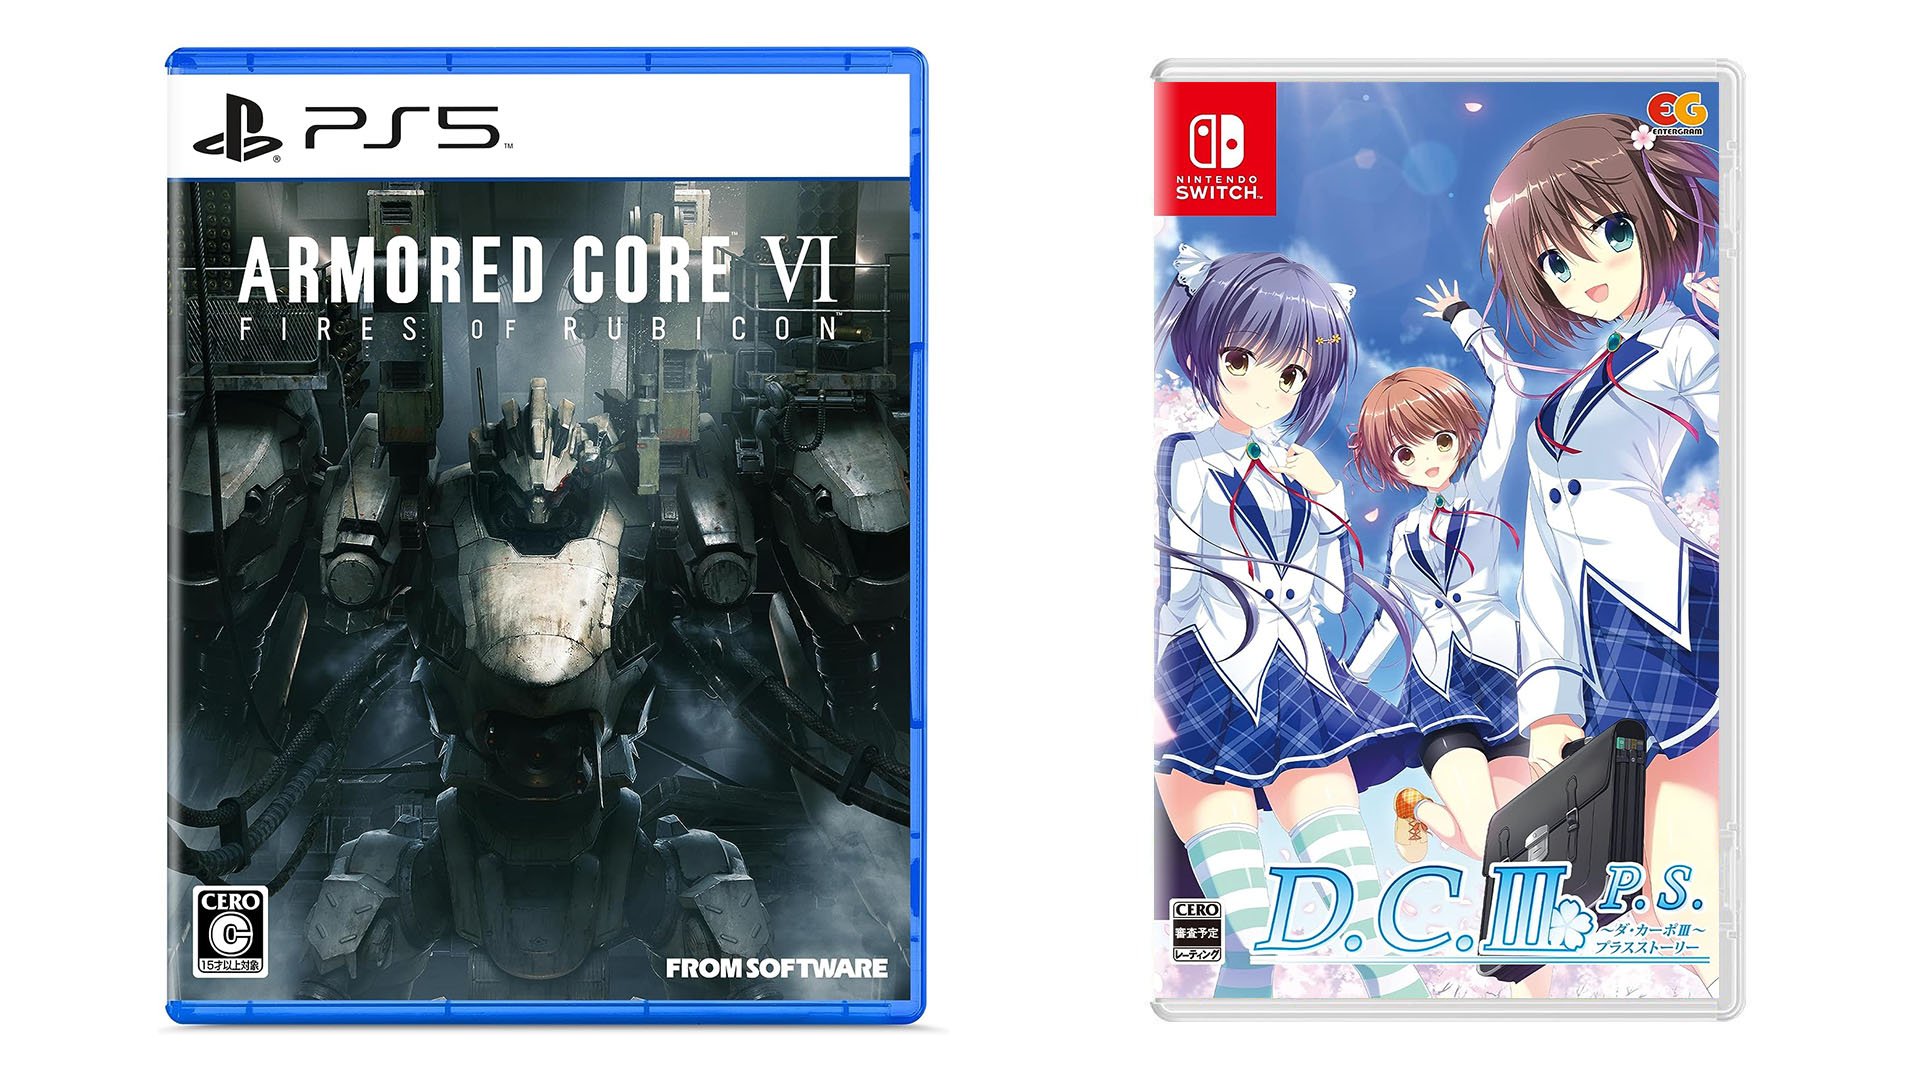 This Week's Japanese Game Releases: Armored Core VI: Fires of Rubicon,  D.C.III ~Da Capo III~ Plus Story, more - Gematsu